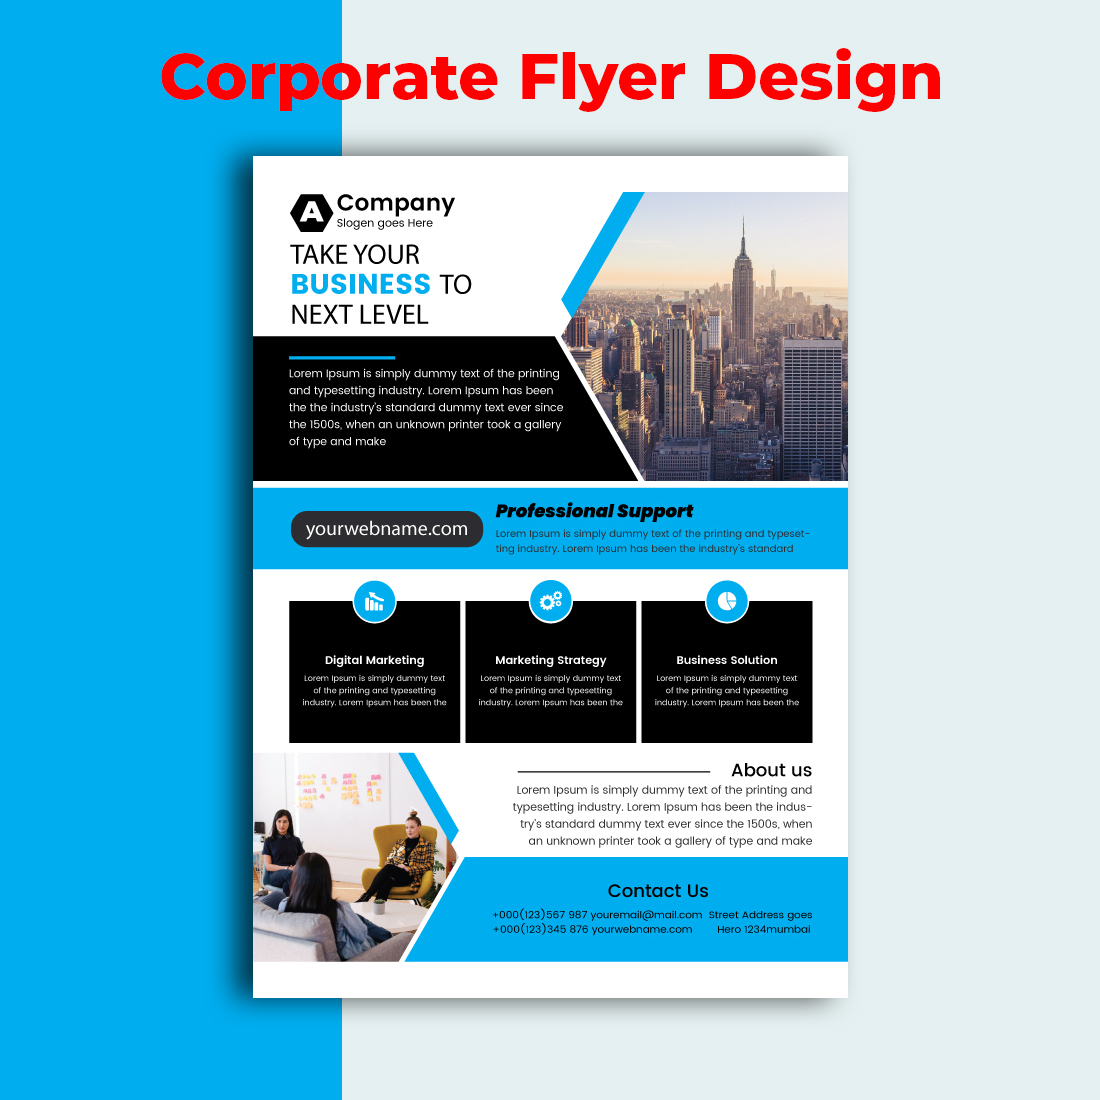 preview image Corporate Flyer Design.